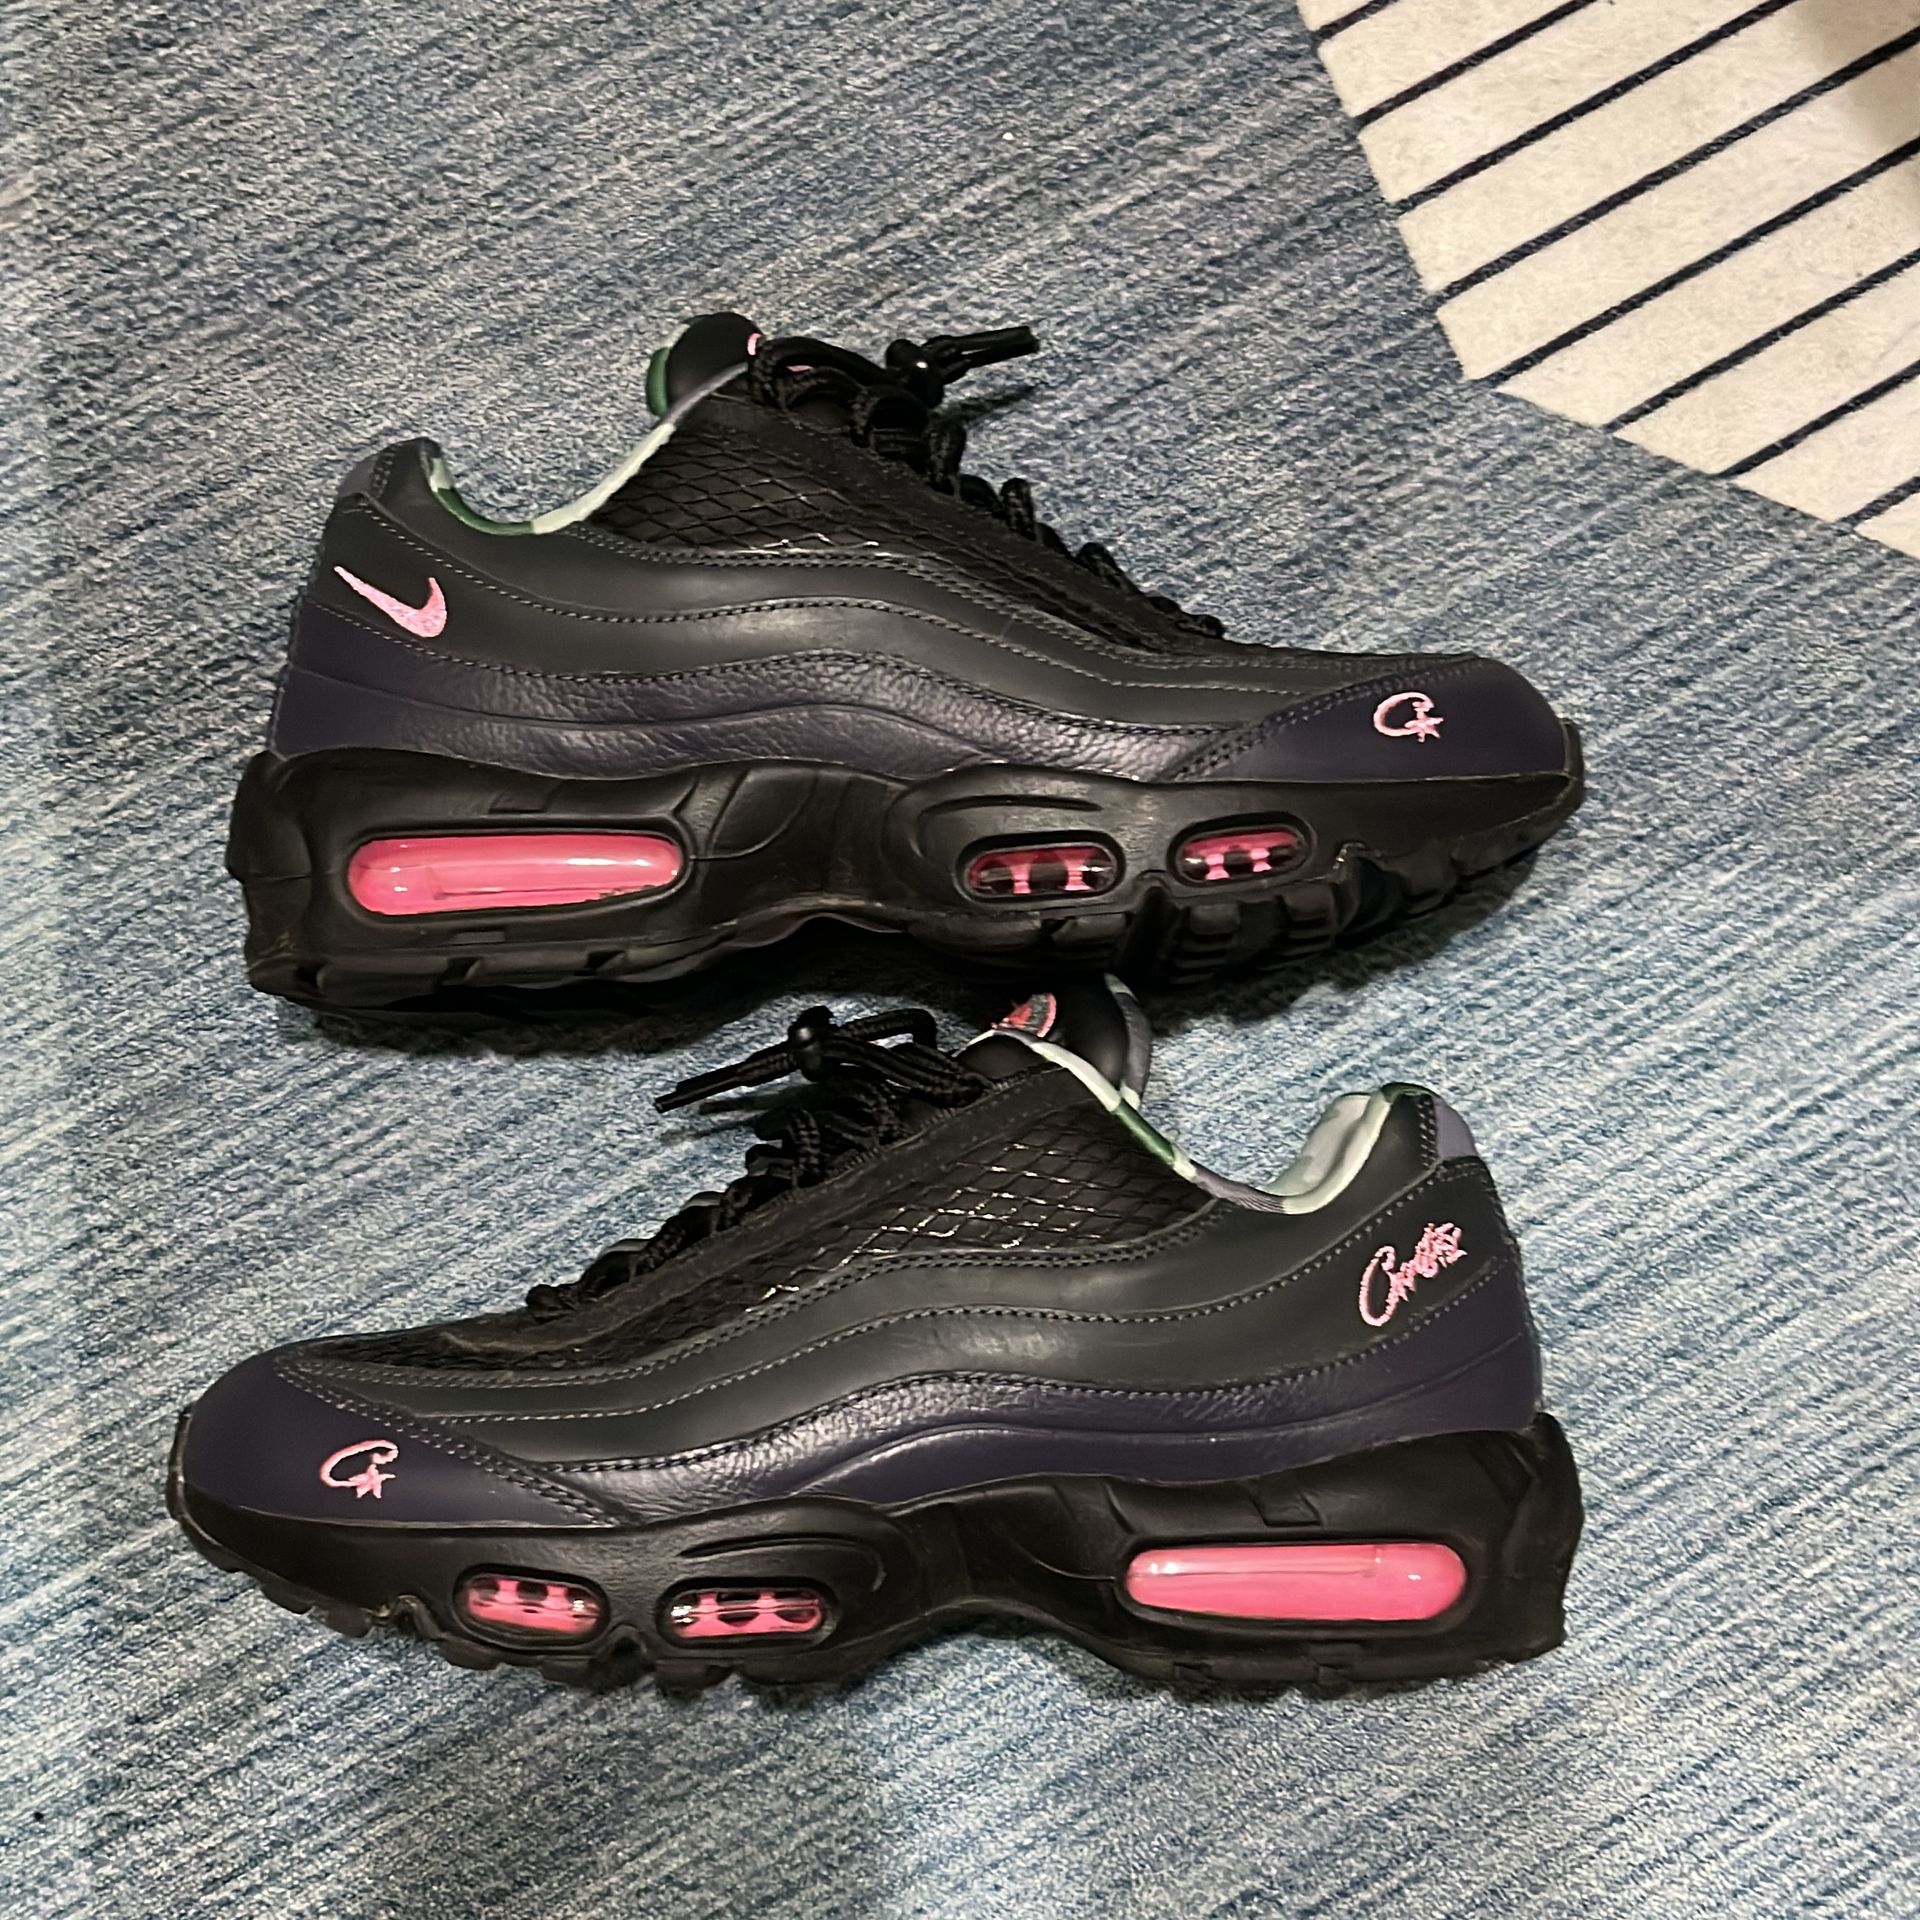 Corteiz x Nike Air Max 95 SP 'Rules the World - Pink Beam'